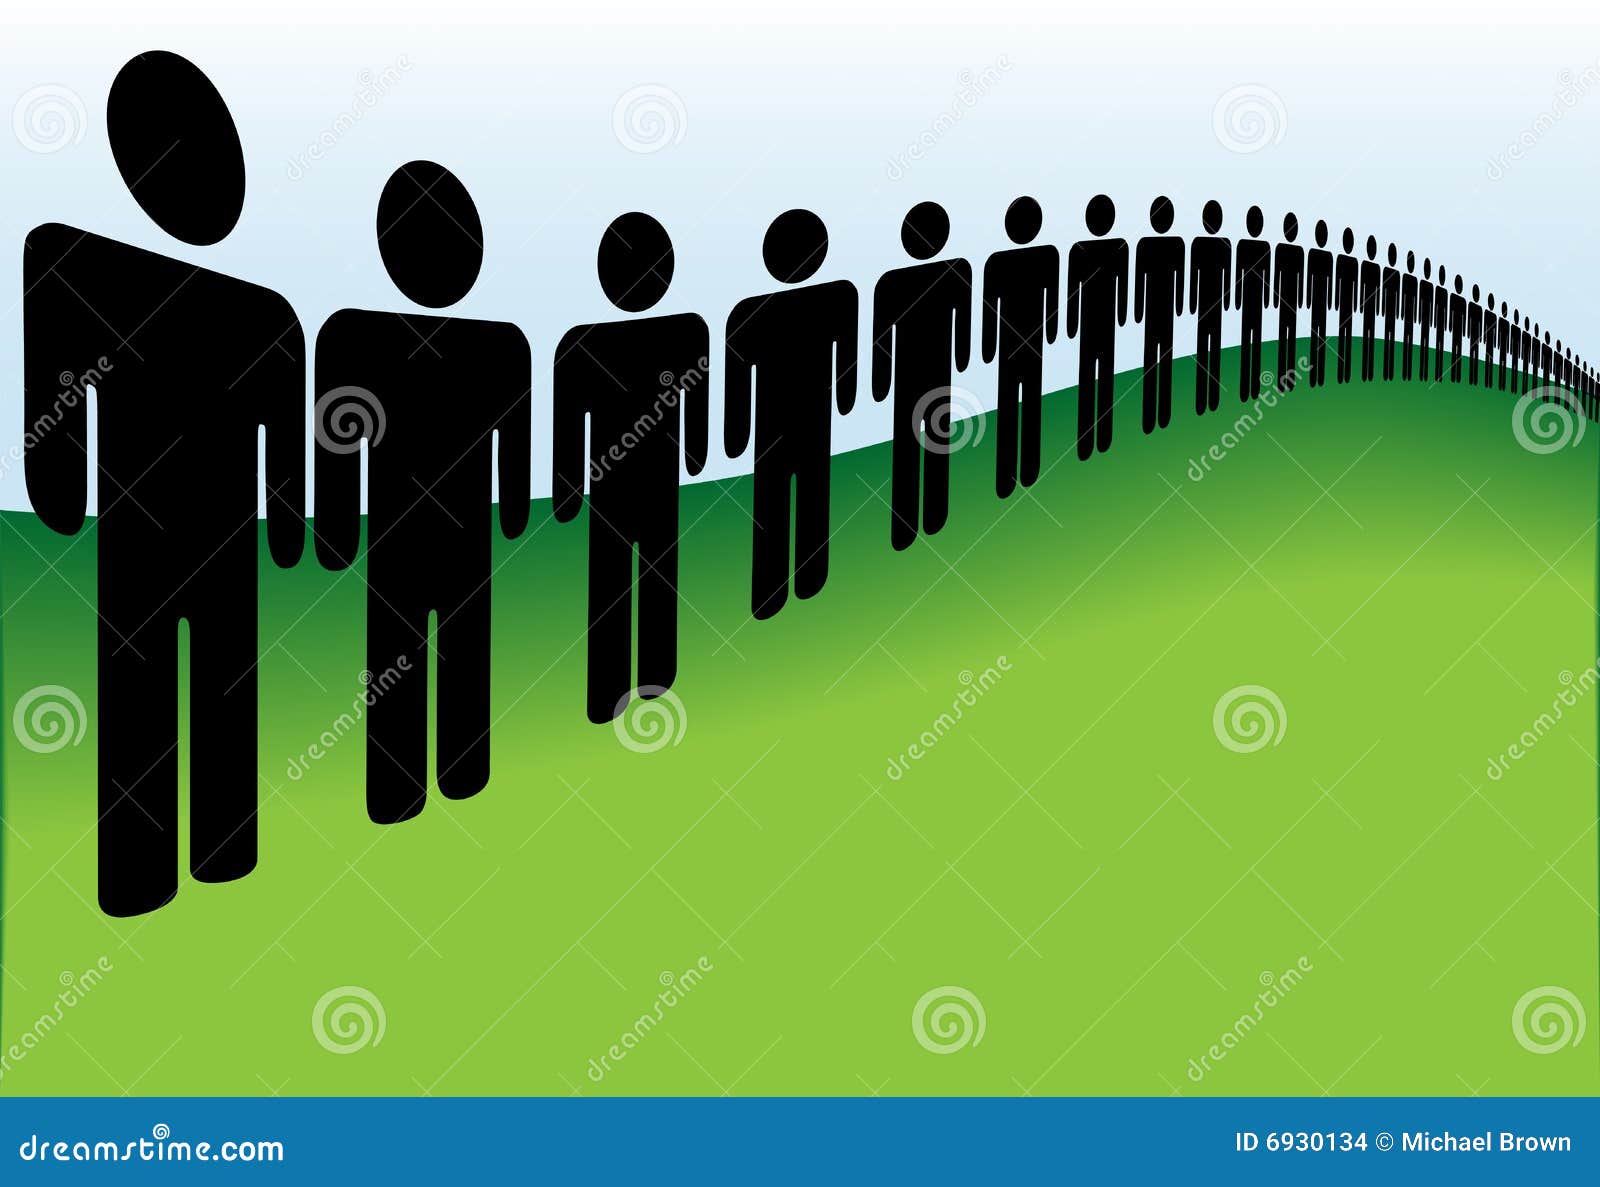 Long Line Of People Lined Up On The Earth Stock Vector Illustration Of Symbol Abstract